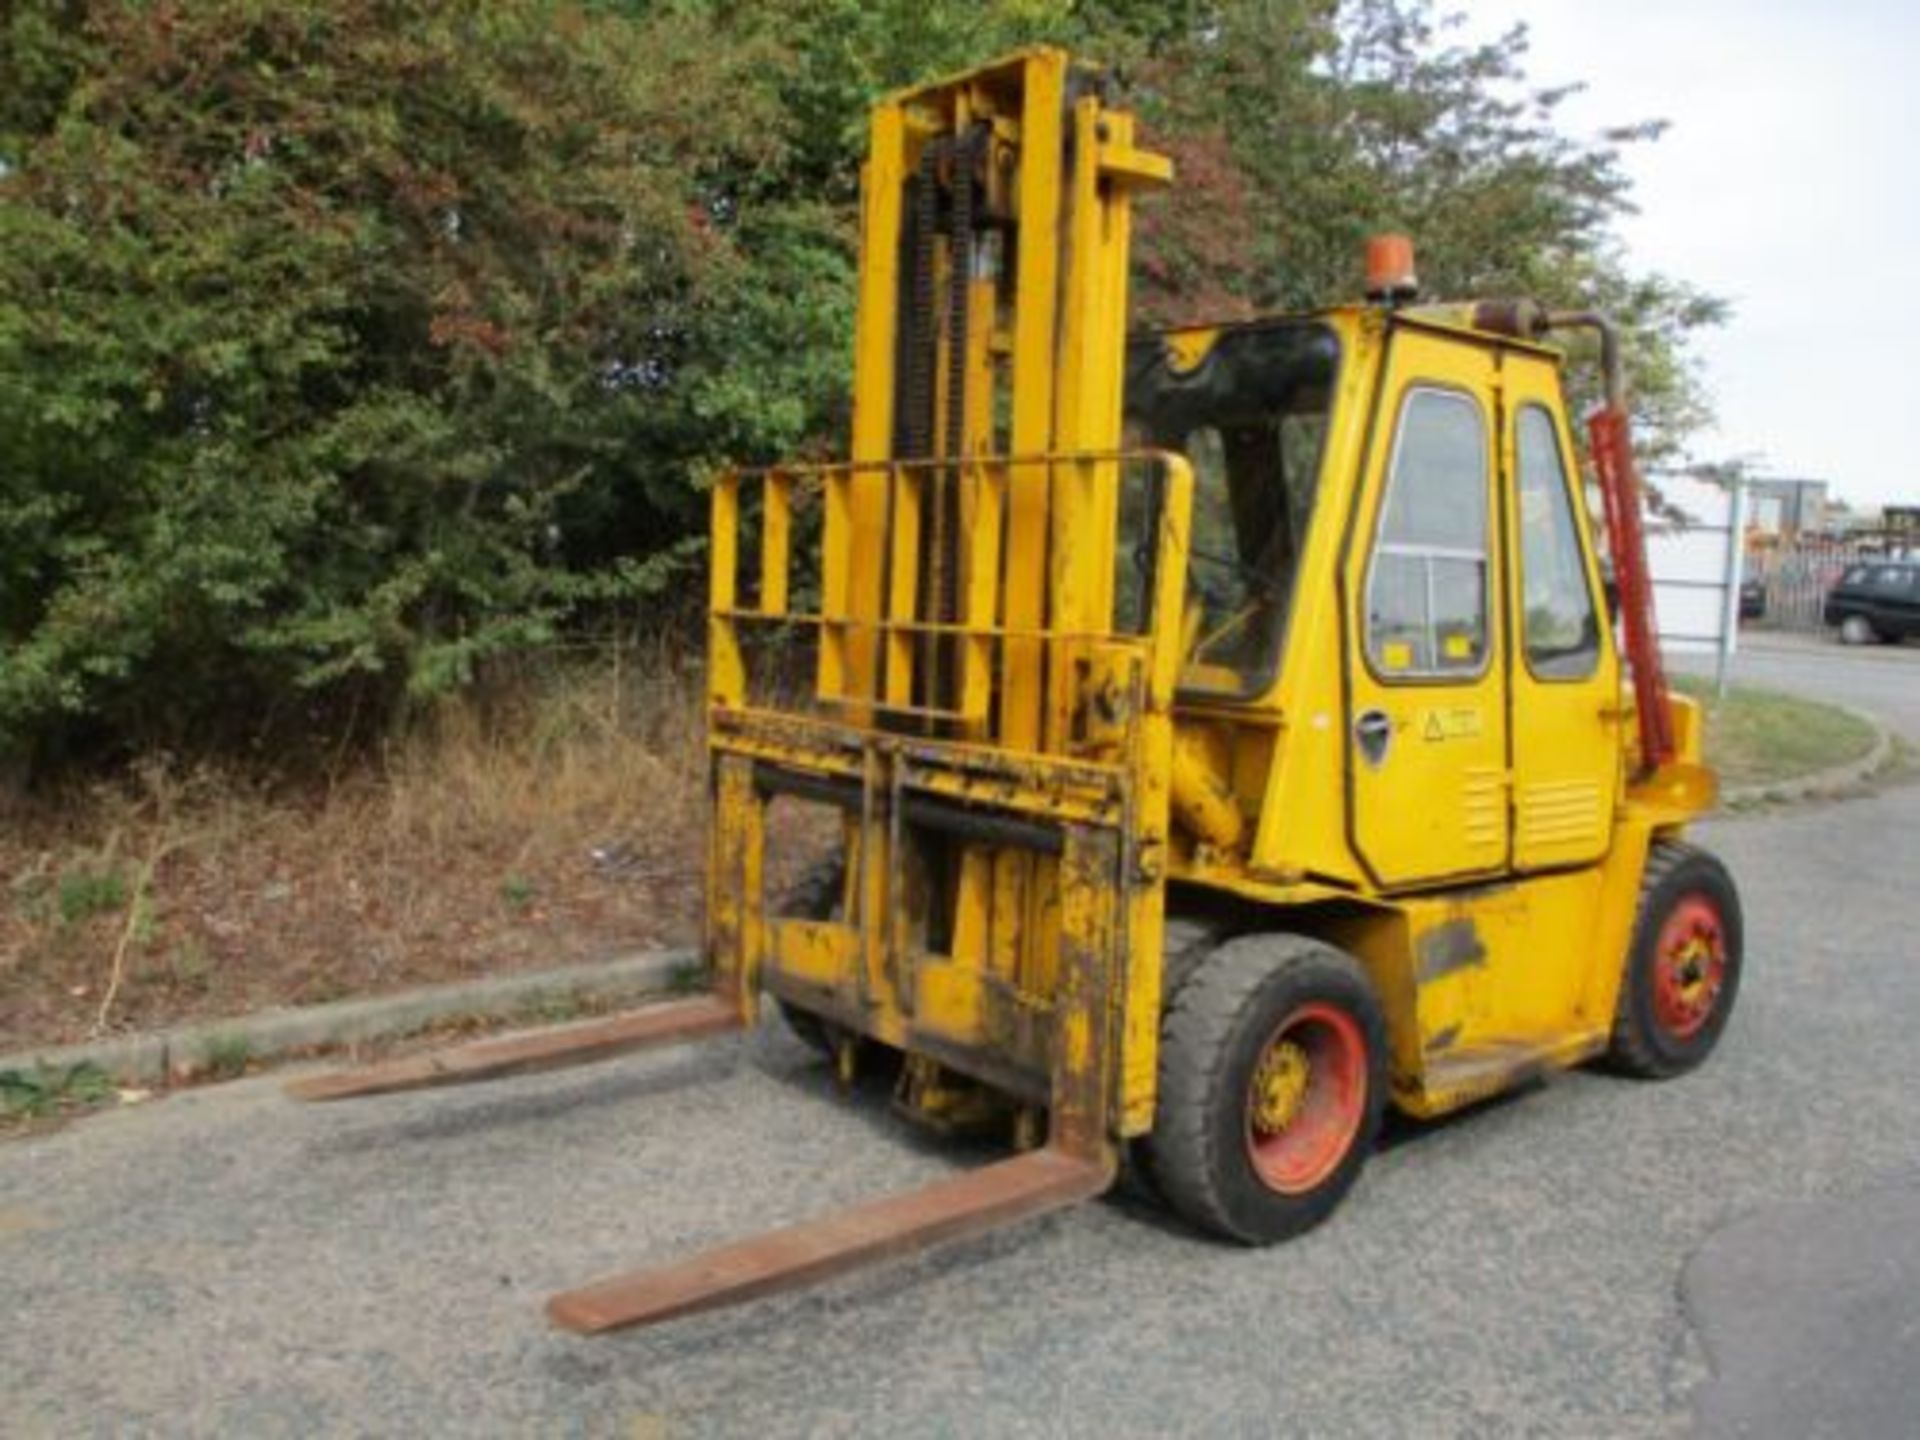 CLIMAX DA50 FORK LIFT FORKLIFT TRUCK STACKER 5 TON LIFT 6 7 8 10 DELIVERY - Image 12 of 12